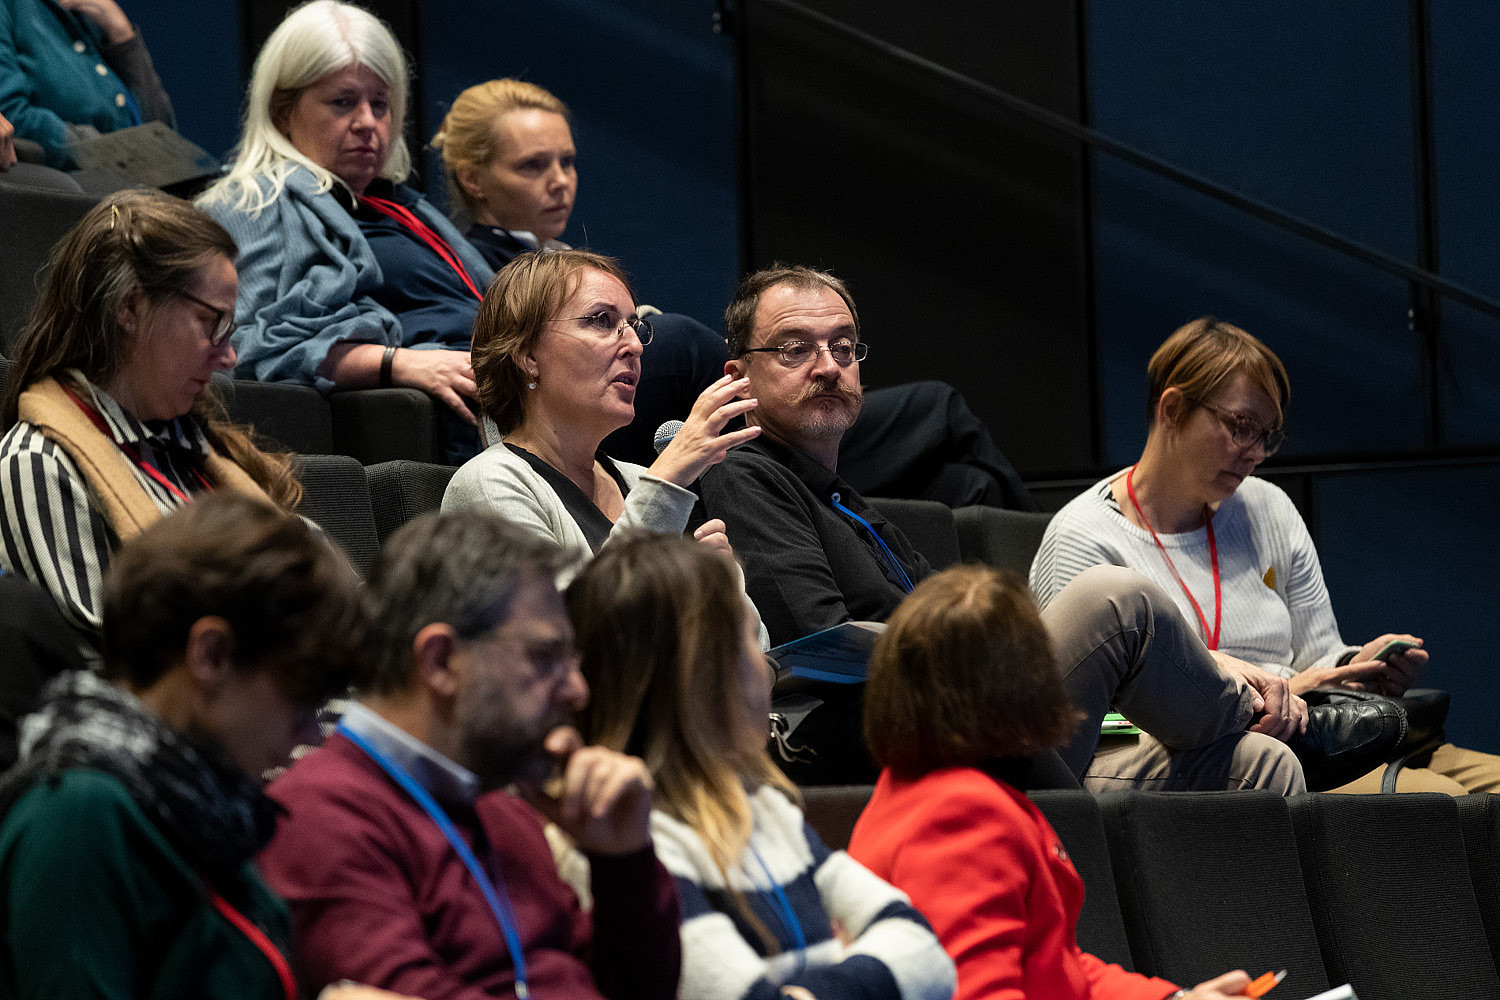 A person sitting in an audience uses a microphone to ask a question.   © Image: Berta Jänes